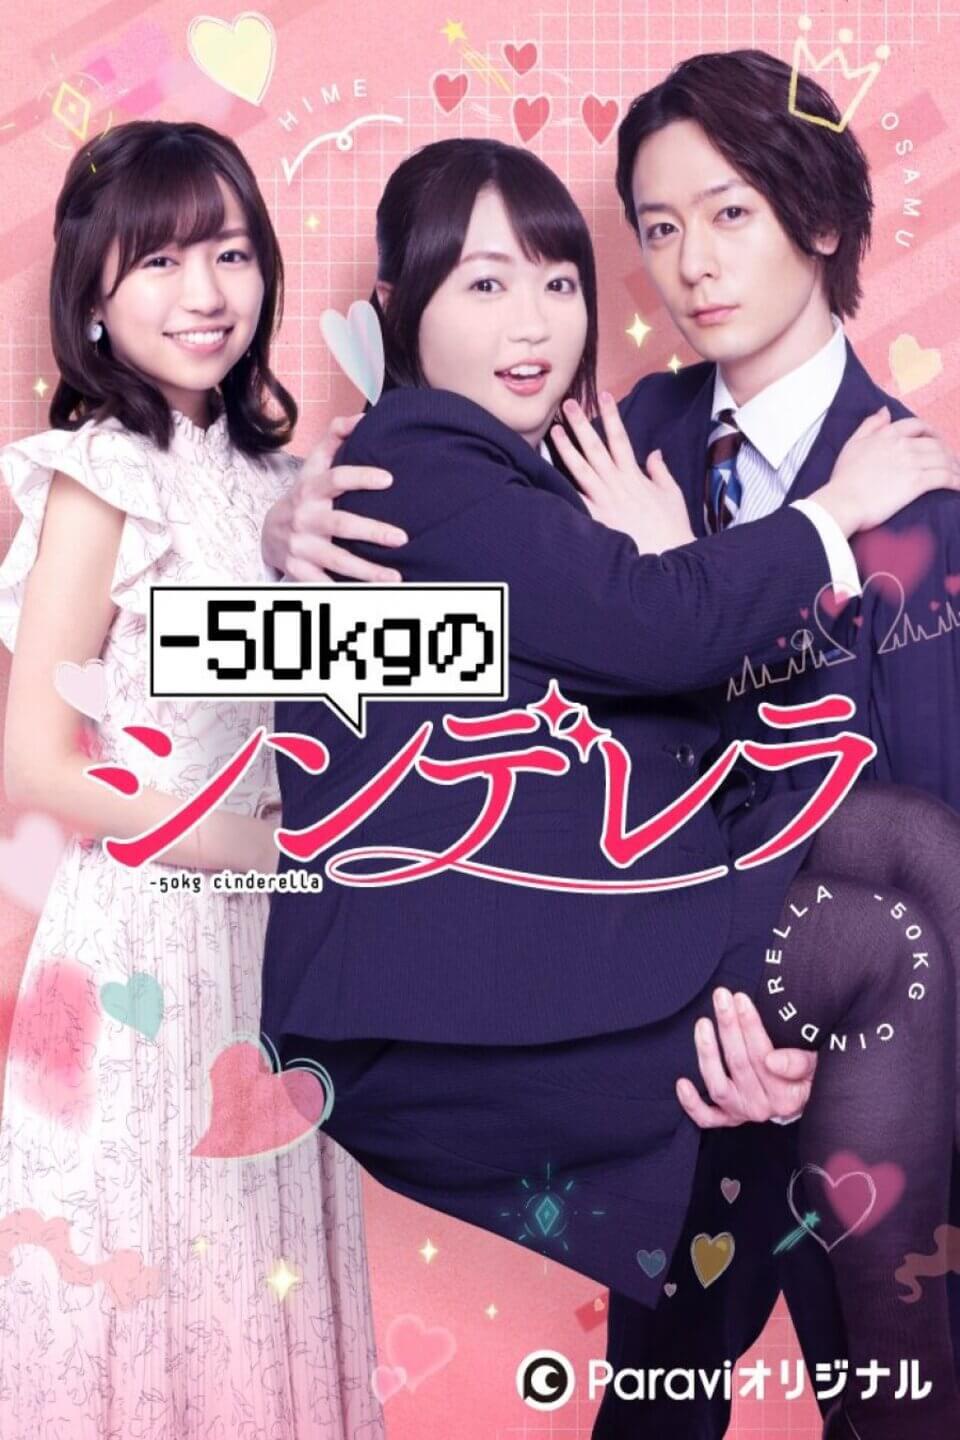 TV ratings for -50kg No Cinderella (－50kgのシンデレラ) in Mexico. Paravi TV series